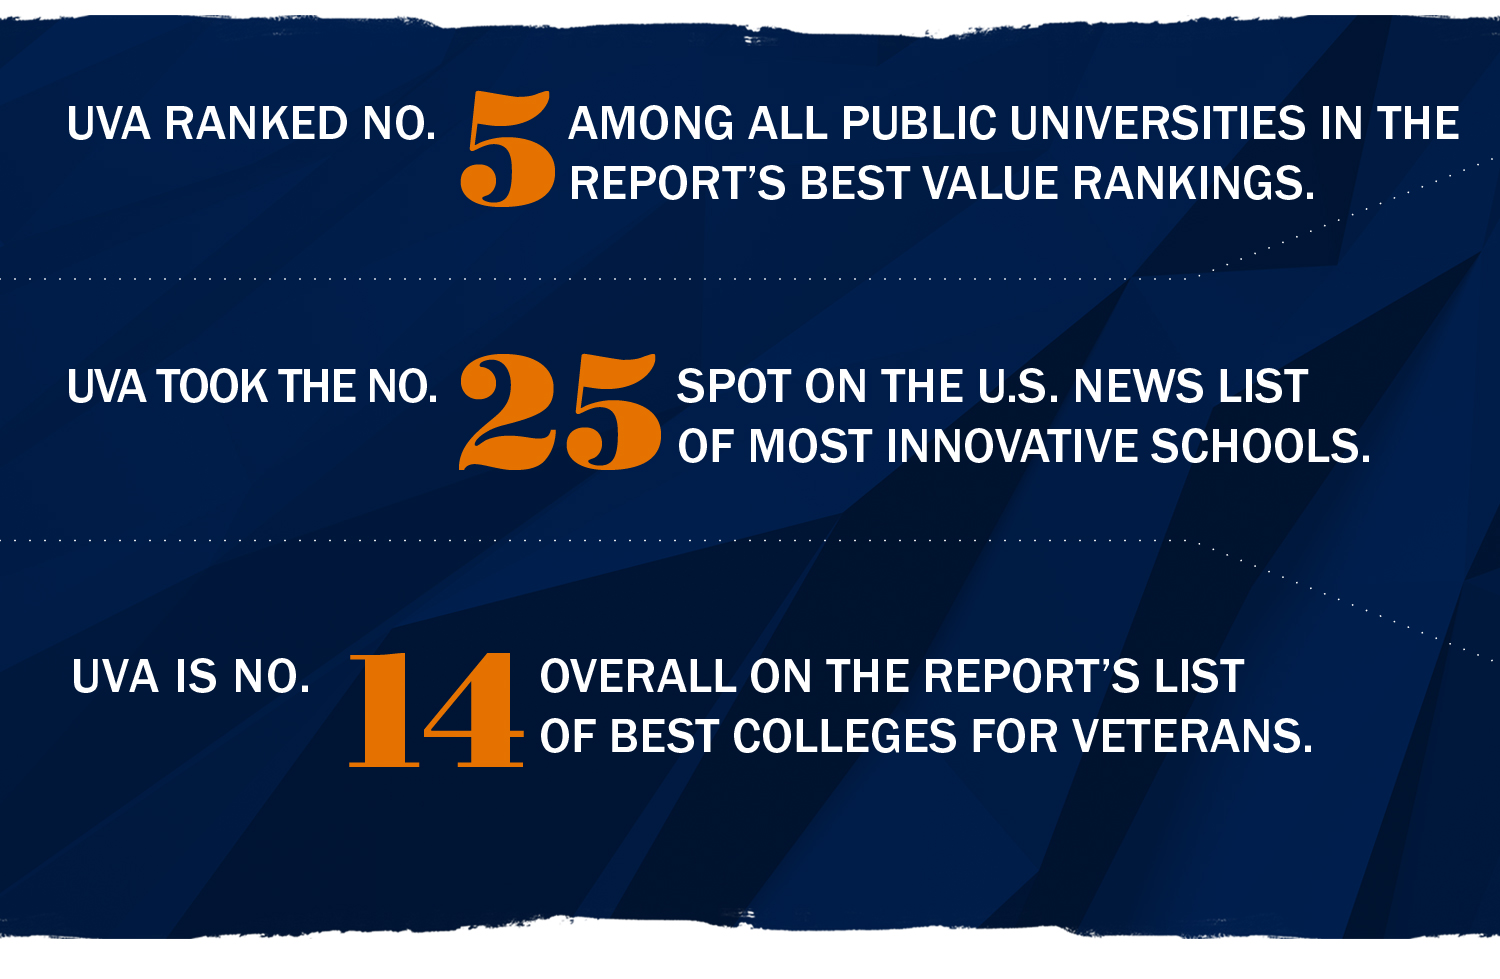 text reads: UVA ranked Number 5 among all public universities in the report's best value rankings. UVA Took the Number 25th spot on the U.S. News list of most innovative schools.  UVA Is Number 14 overall on the report's list of best colleges for veterans.